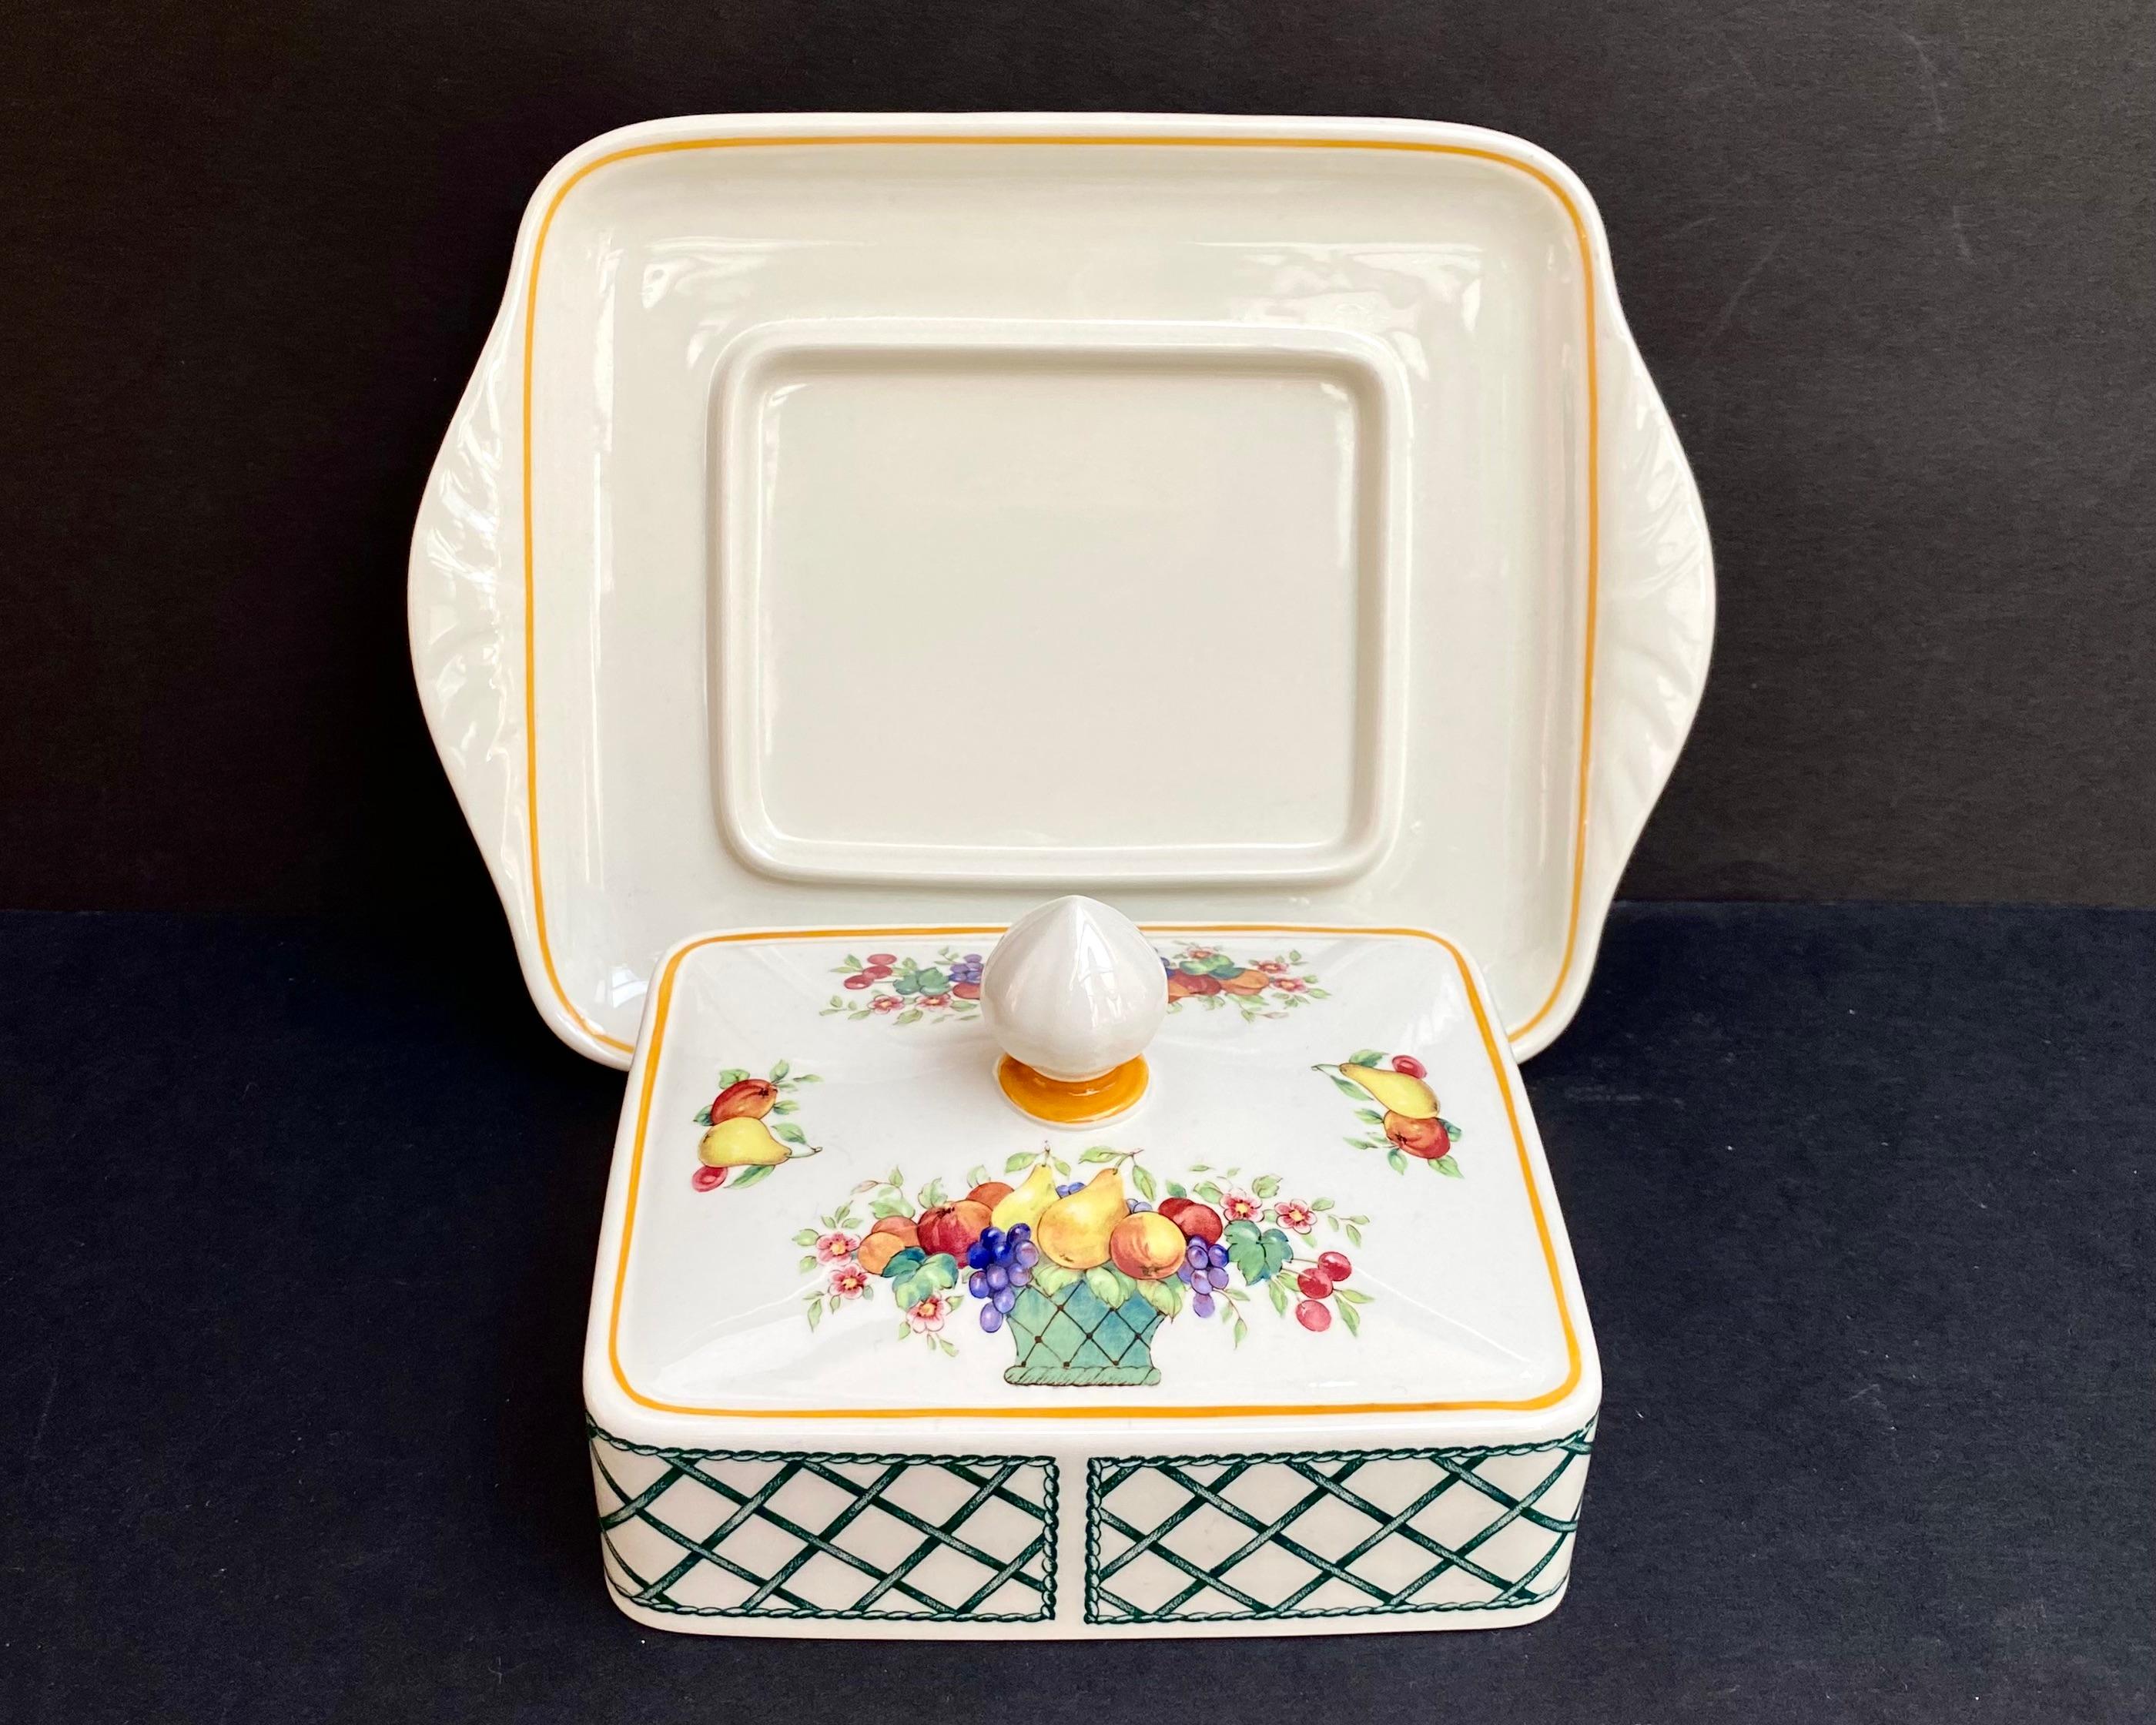 Villeroy & Boch Basket Rare Rectangular Covered Butter Dish, Germany, 1970 In Excellent Condition For Sale In Bastogne, BE